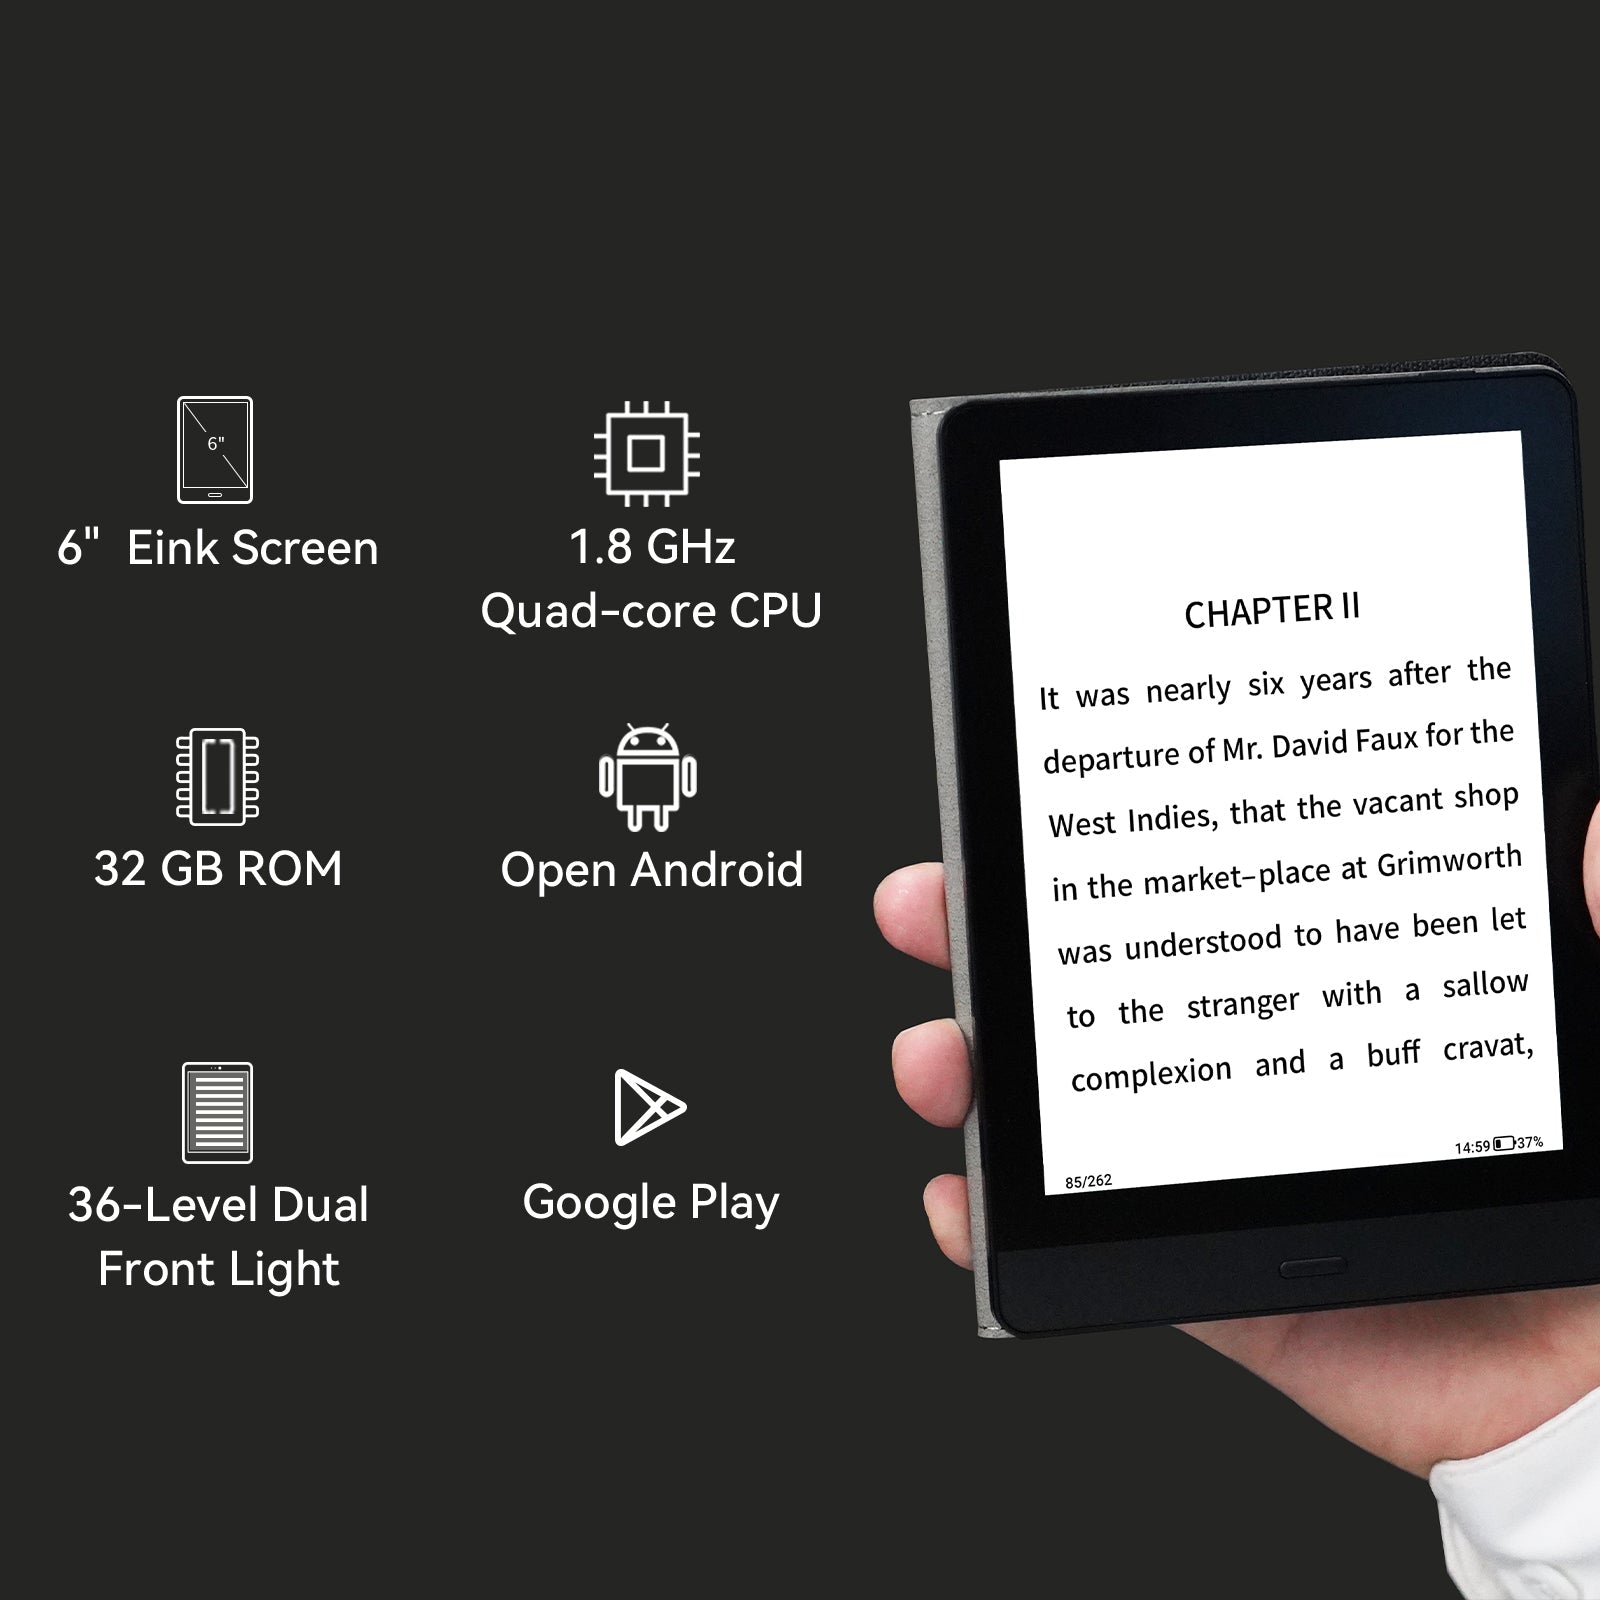 Bigme Read is a 6-inch ebook reader with Google Play - Good e-Reader